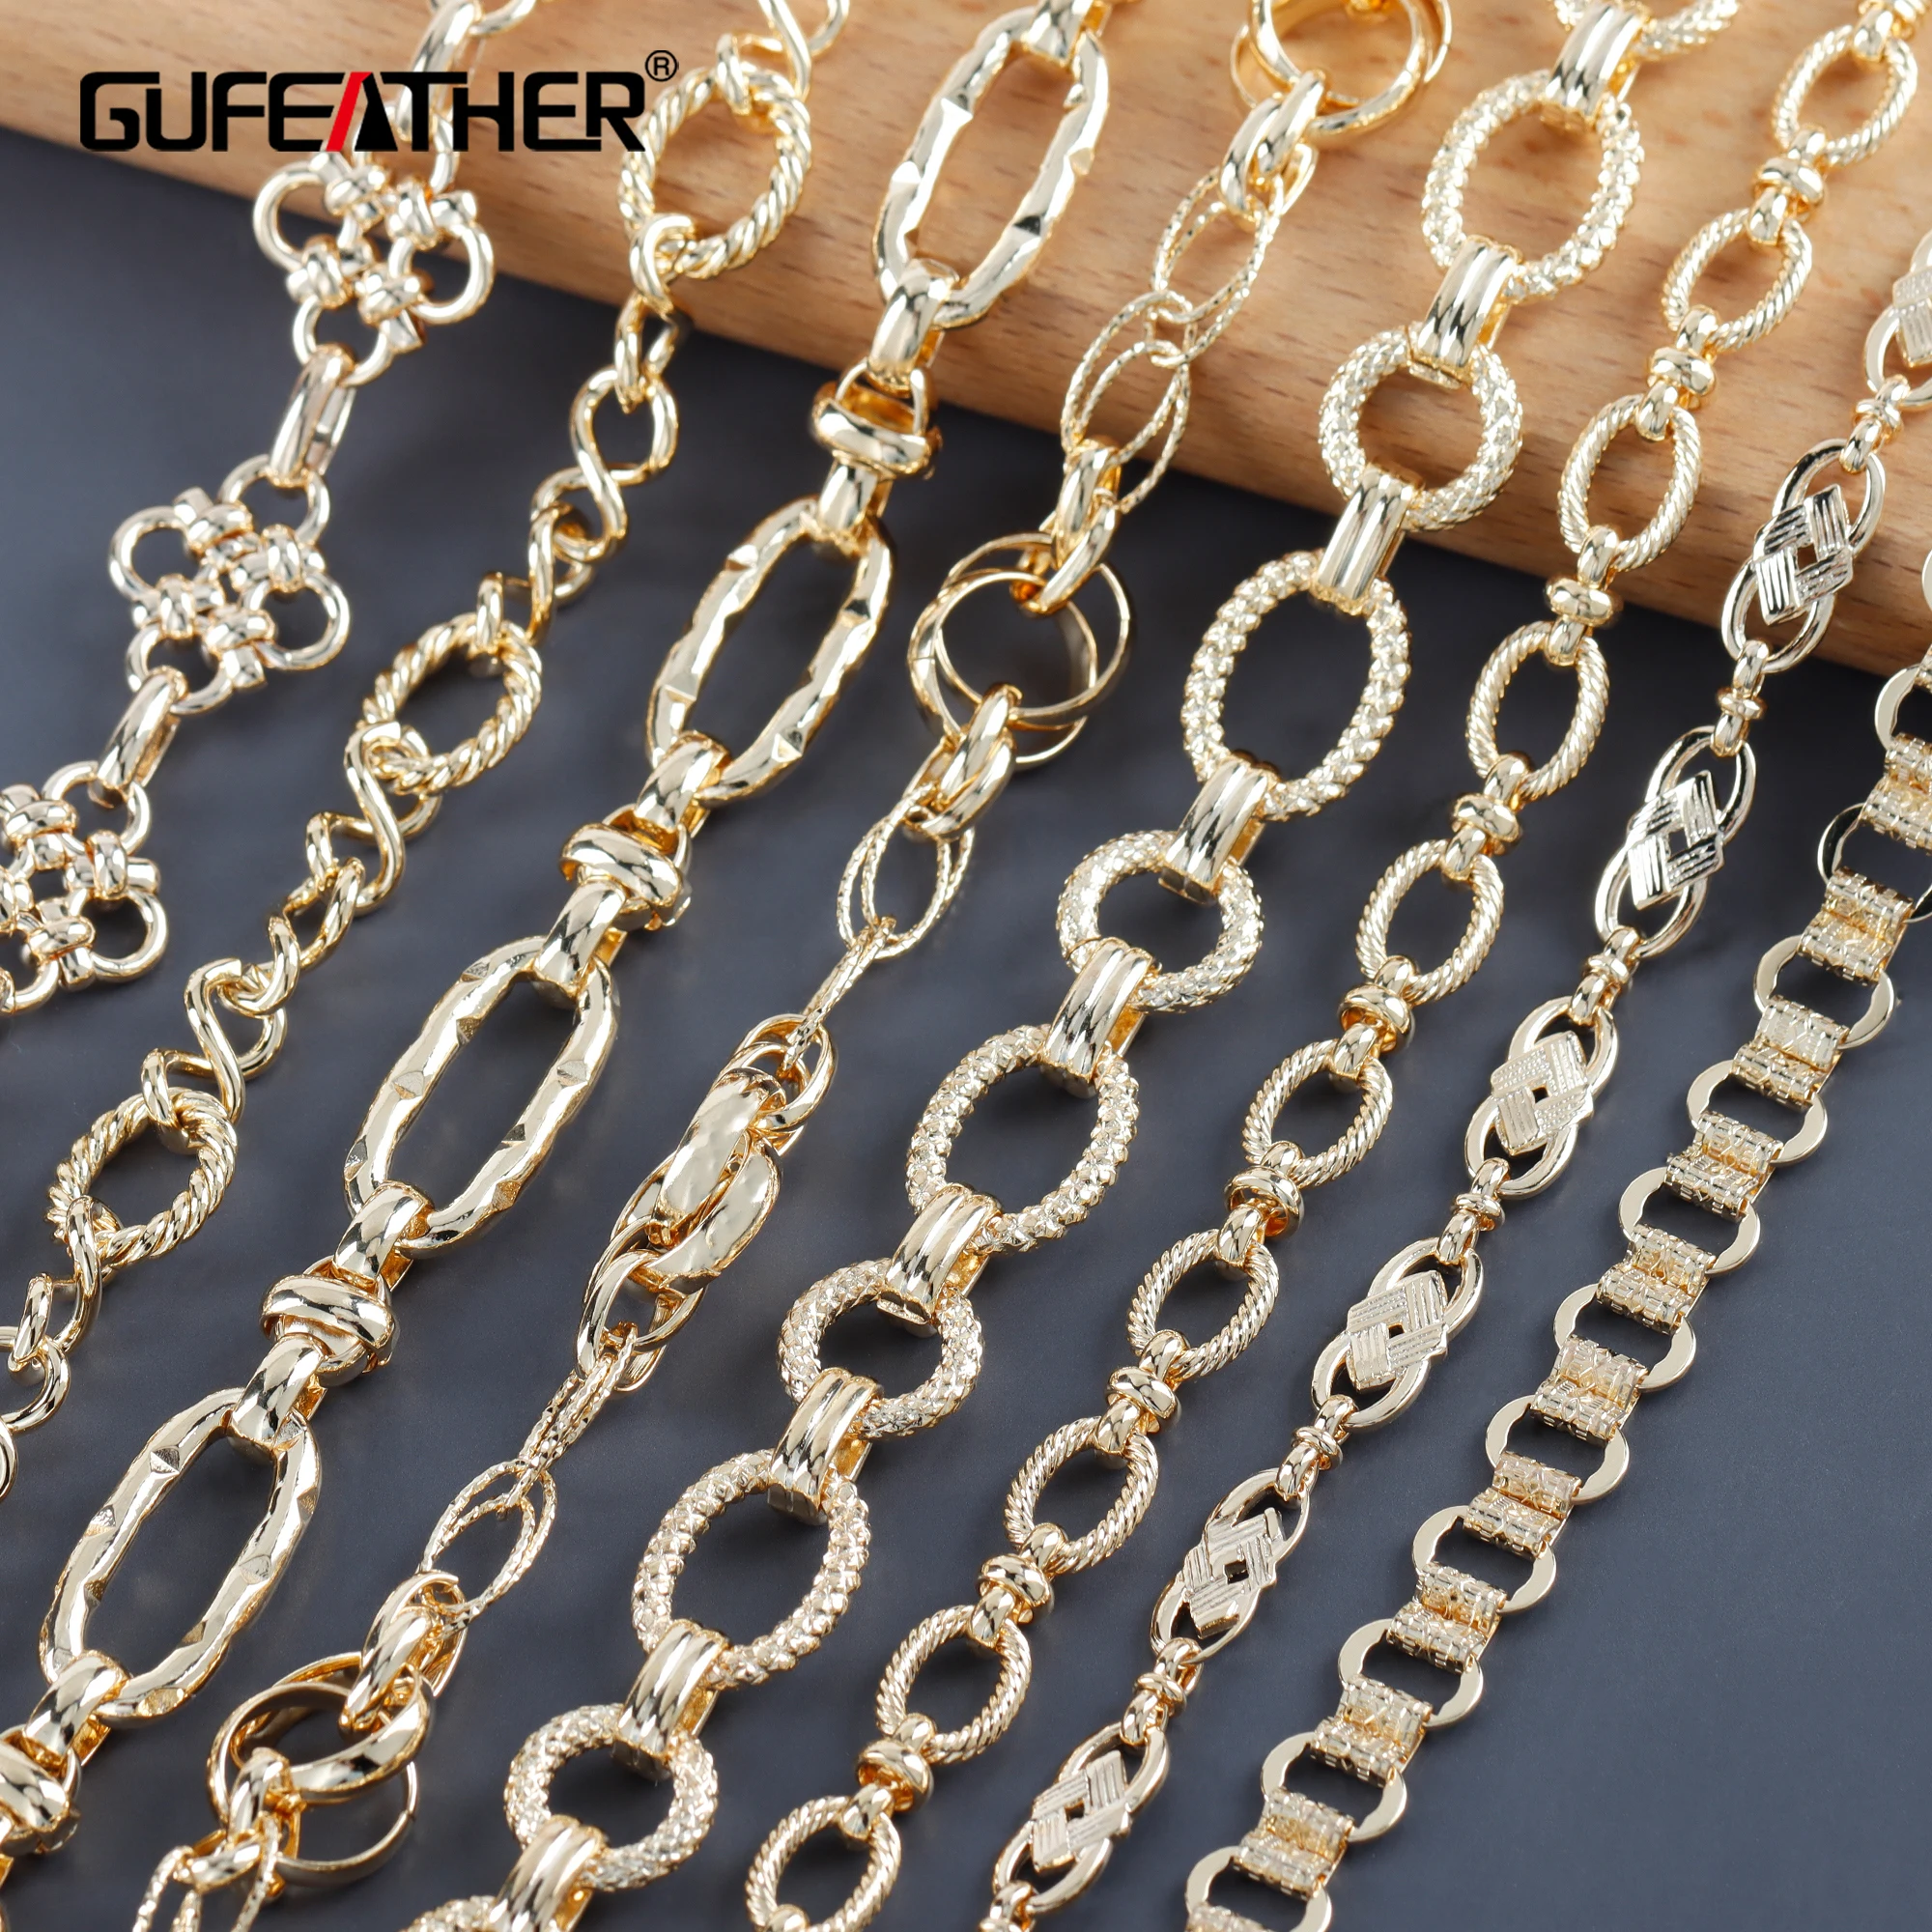 

C230 Vintage Copper Metal 18K Gold Plated Diy Necklace Chain For Women Jewelry Making Accessories1m/lot